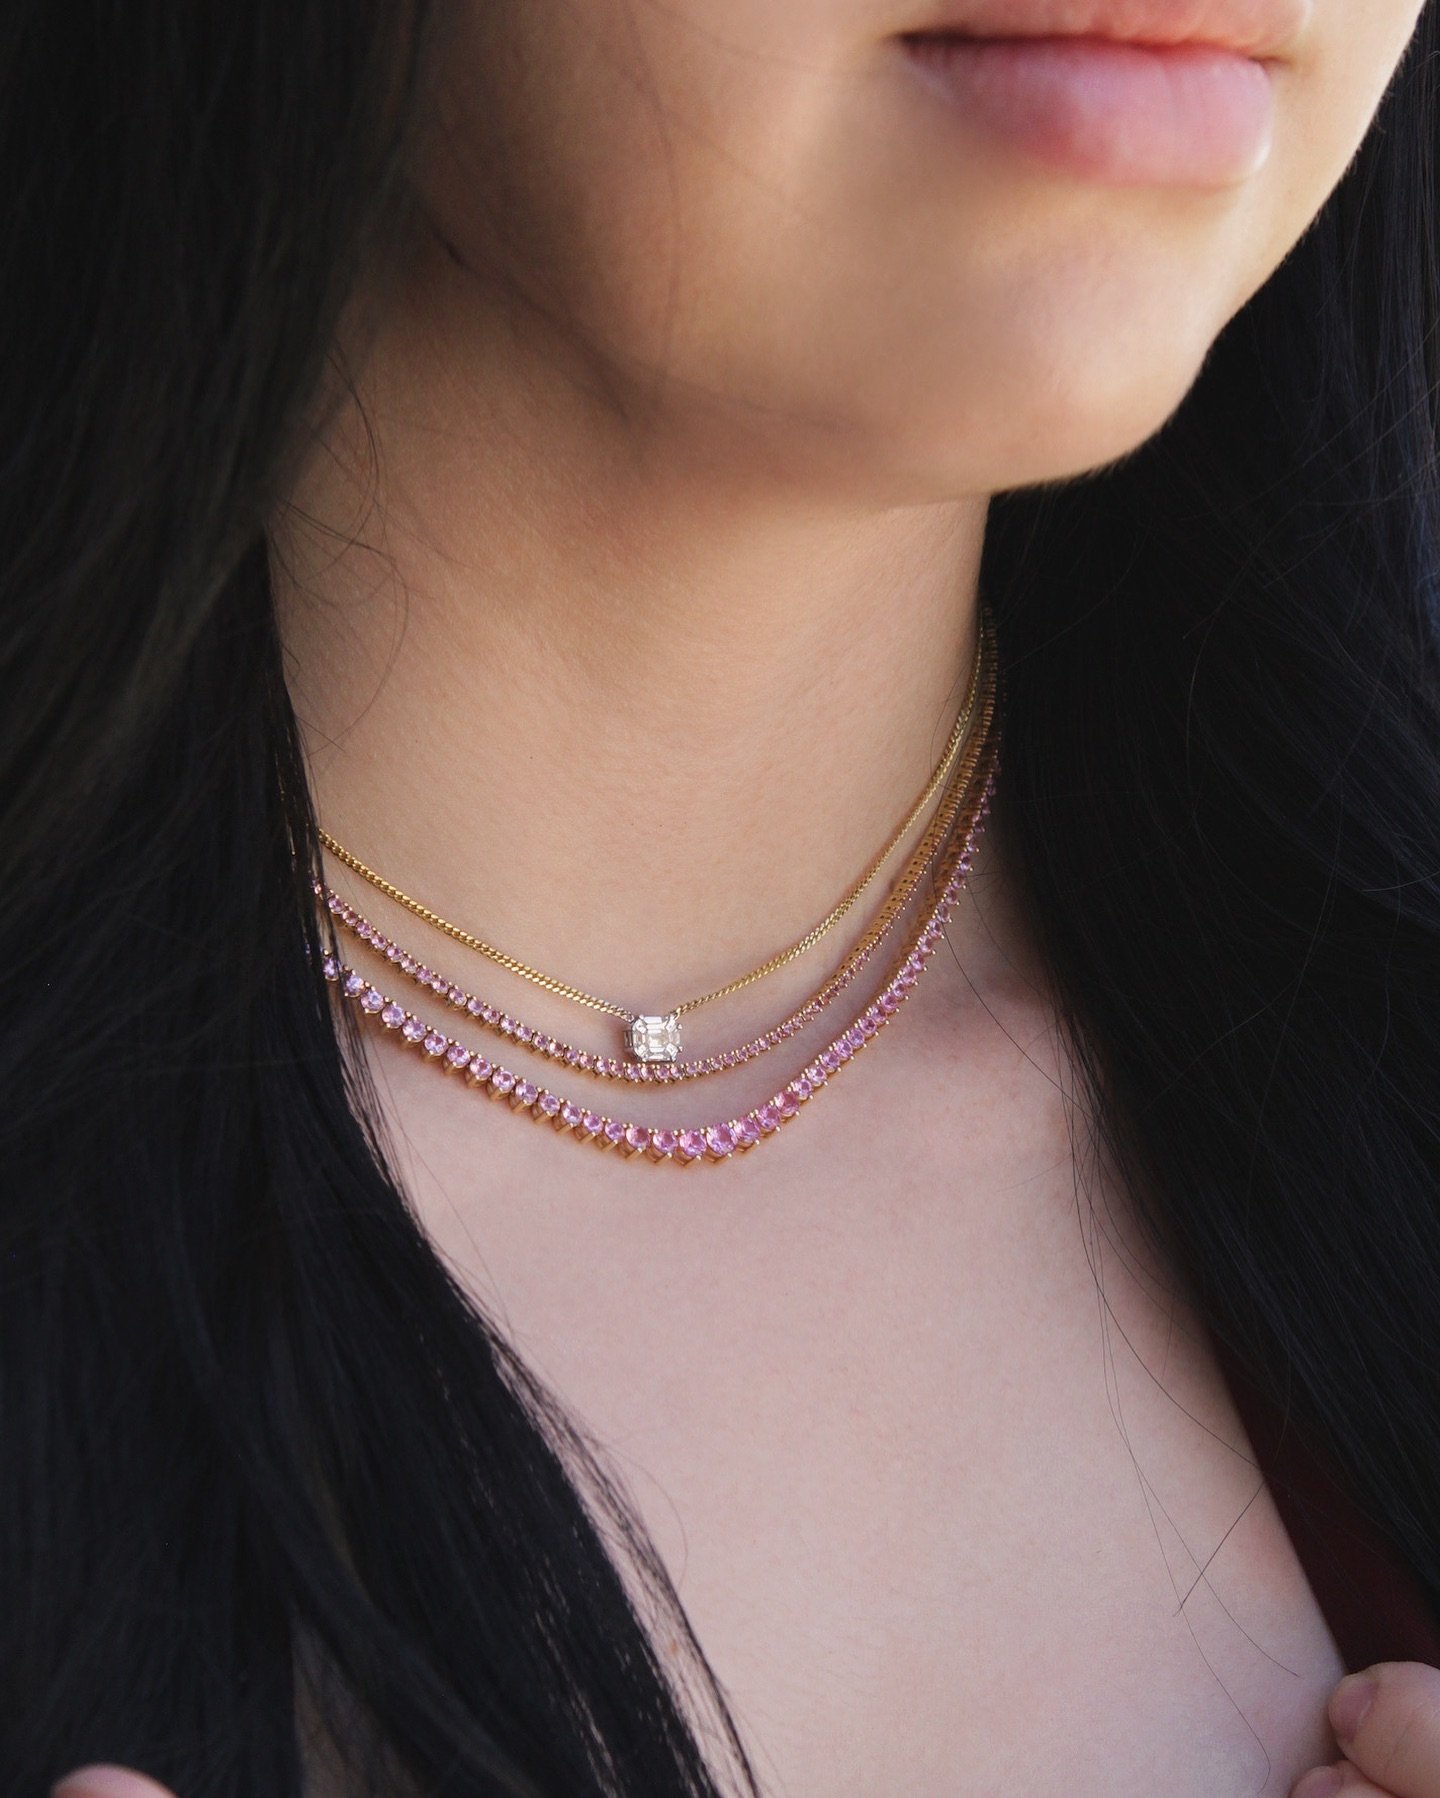 This necklace stack will have you feeling like a princess every single day!
💕
#princessvibes #princess #pink #thinkpink #barbie #necklace #cute #finejewelry #jewelrydesigner #pinksapphire